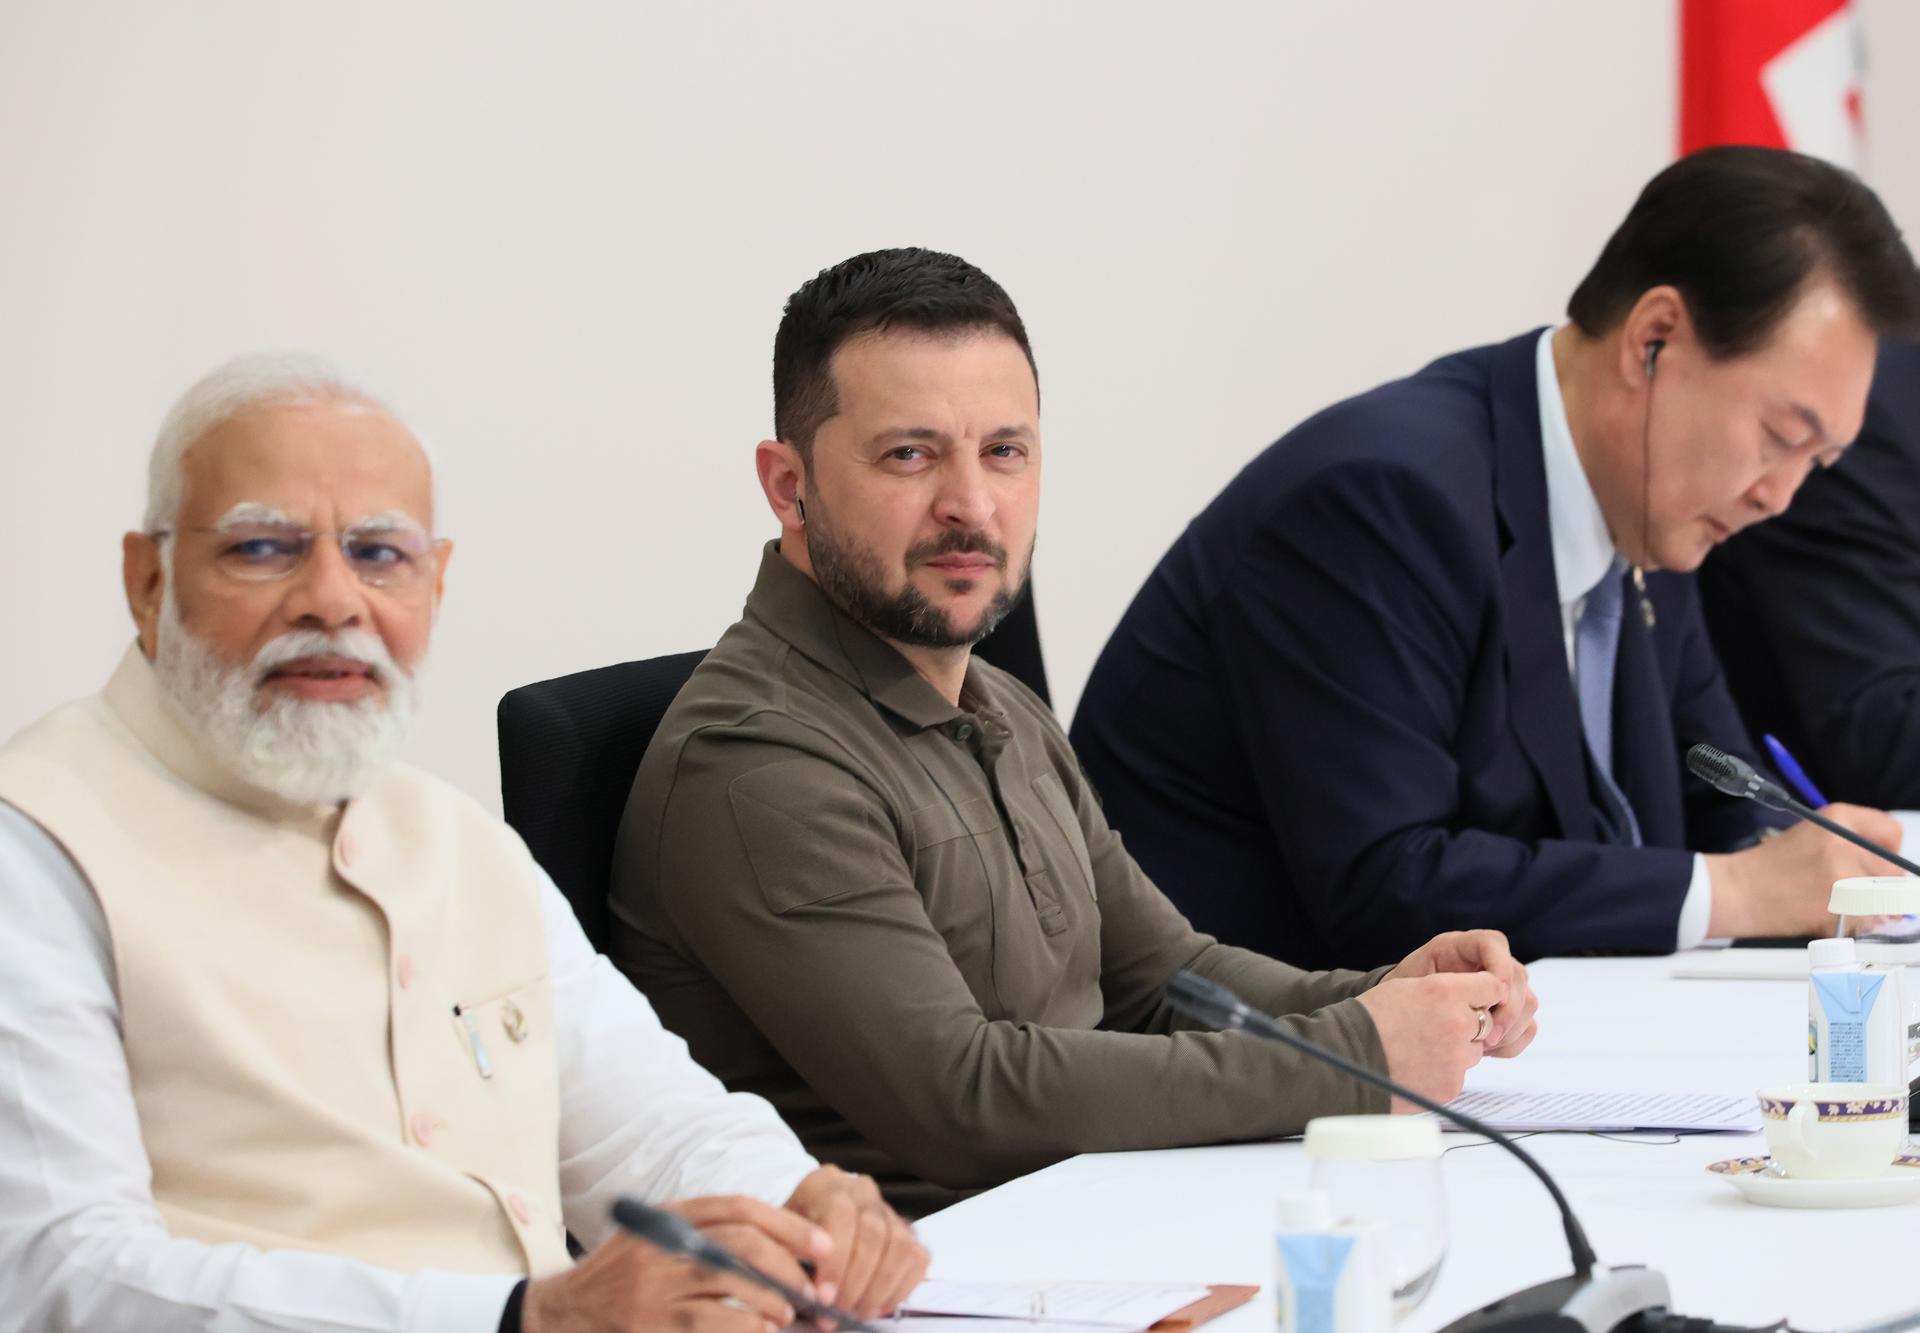 A handout photo made available by the G7 Hiroshima Summit Host shows Ukraine's President Volodymyr Zelensky (C), Indian Prime Minister Narendra Modi (L) and South Korea's President Yoon Suk-yeol (R) attending a session at the G7 Hiroshima Summit in Hiroshima, Japan, 21 May 2023. EFE/EPA/G7 Hiroshima Summit Host